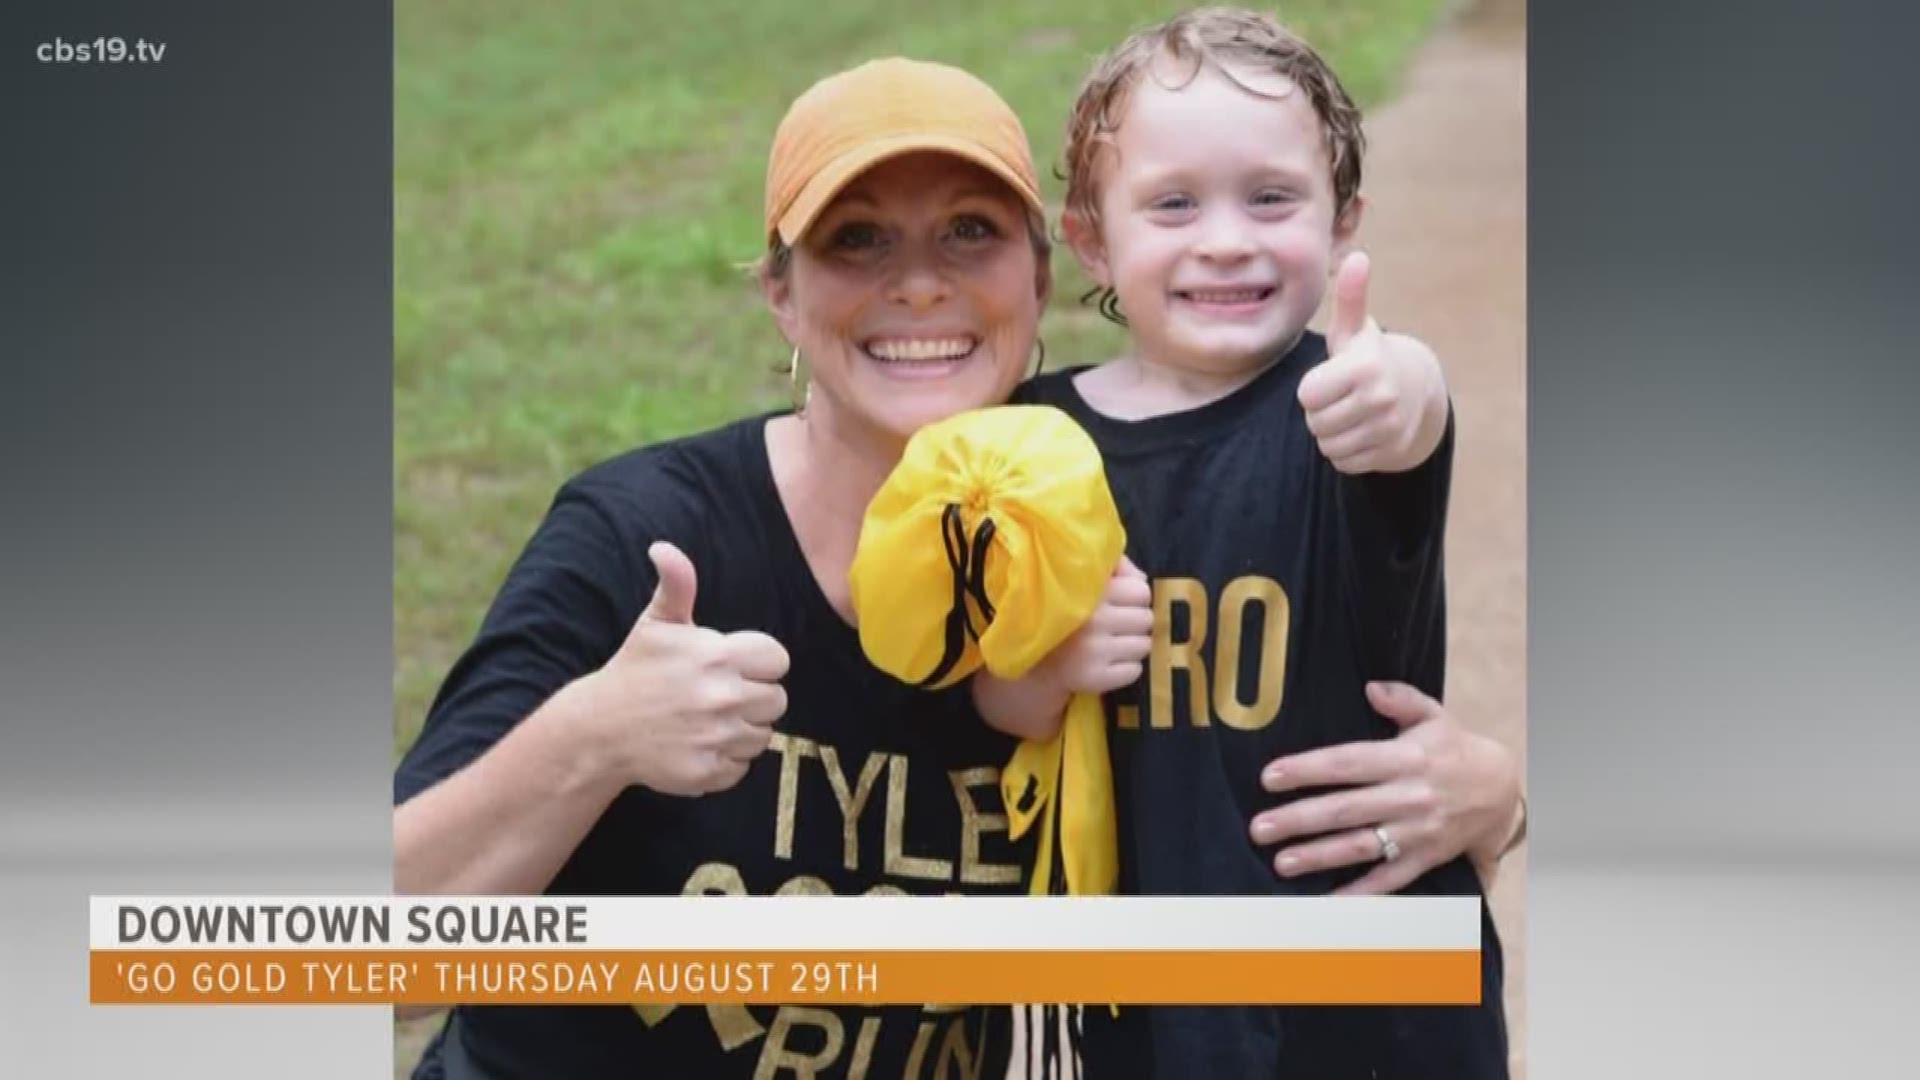 The 5th annual 'Tyler Gold Run' will raise money for local childhood cancer families.